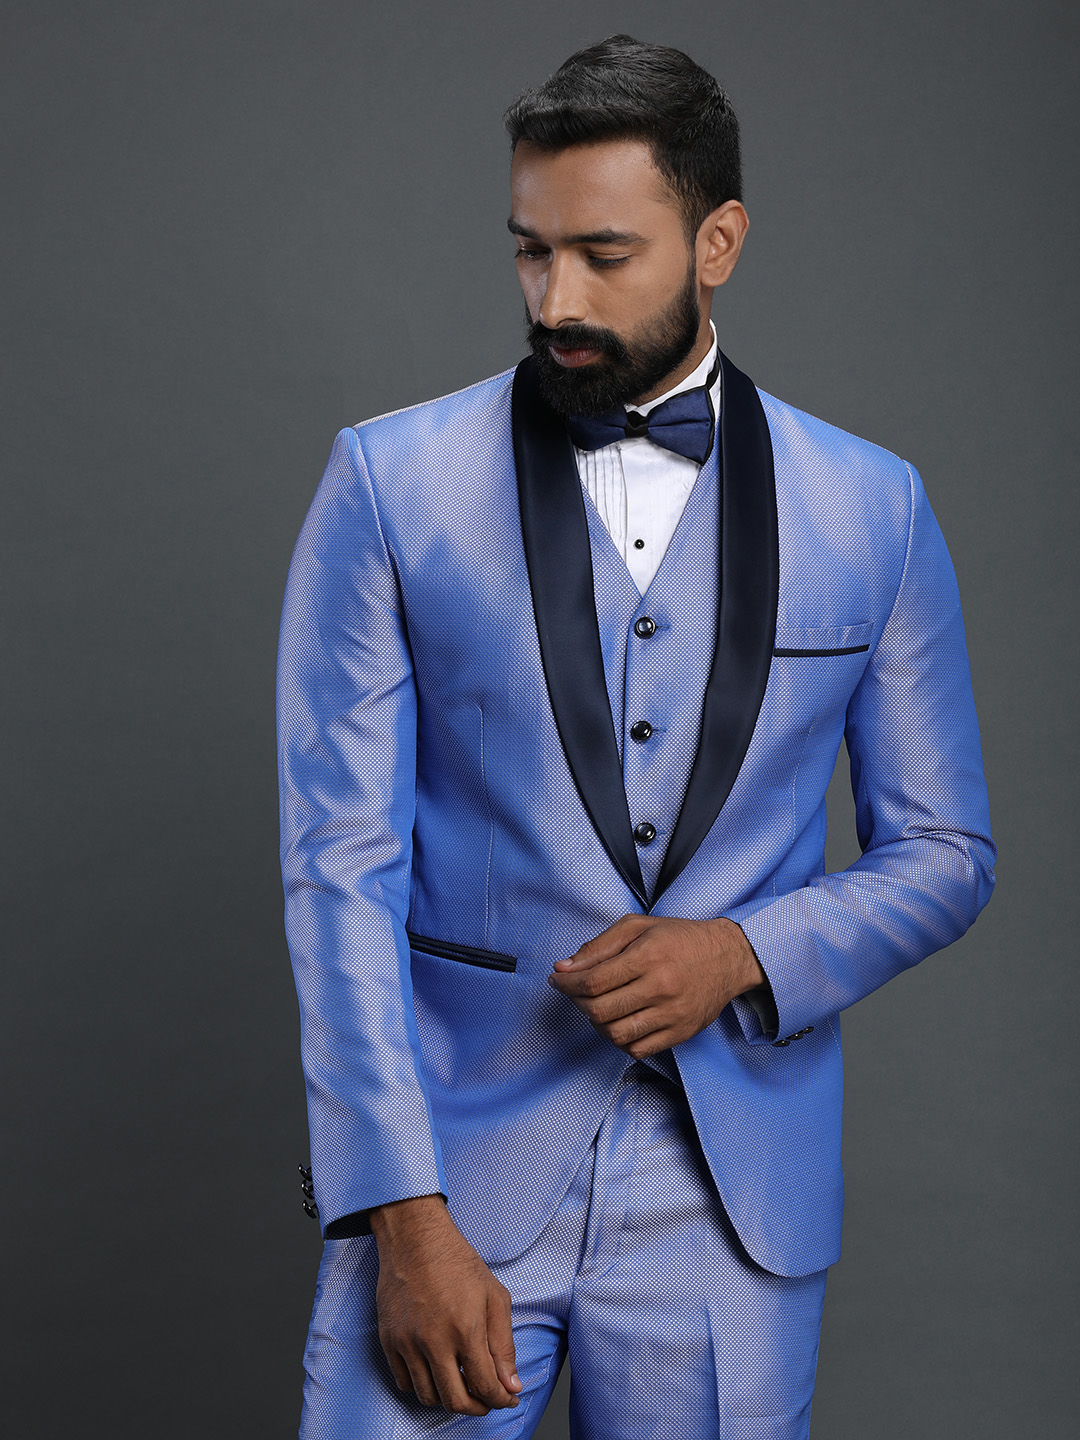 Rent/Buy Blue Bridal 3 Piece Suit | Home Trial | Free Delivery | CandidMen